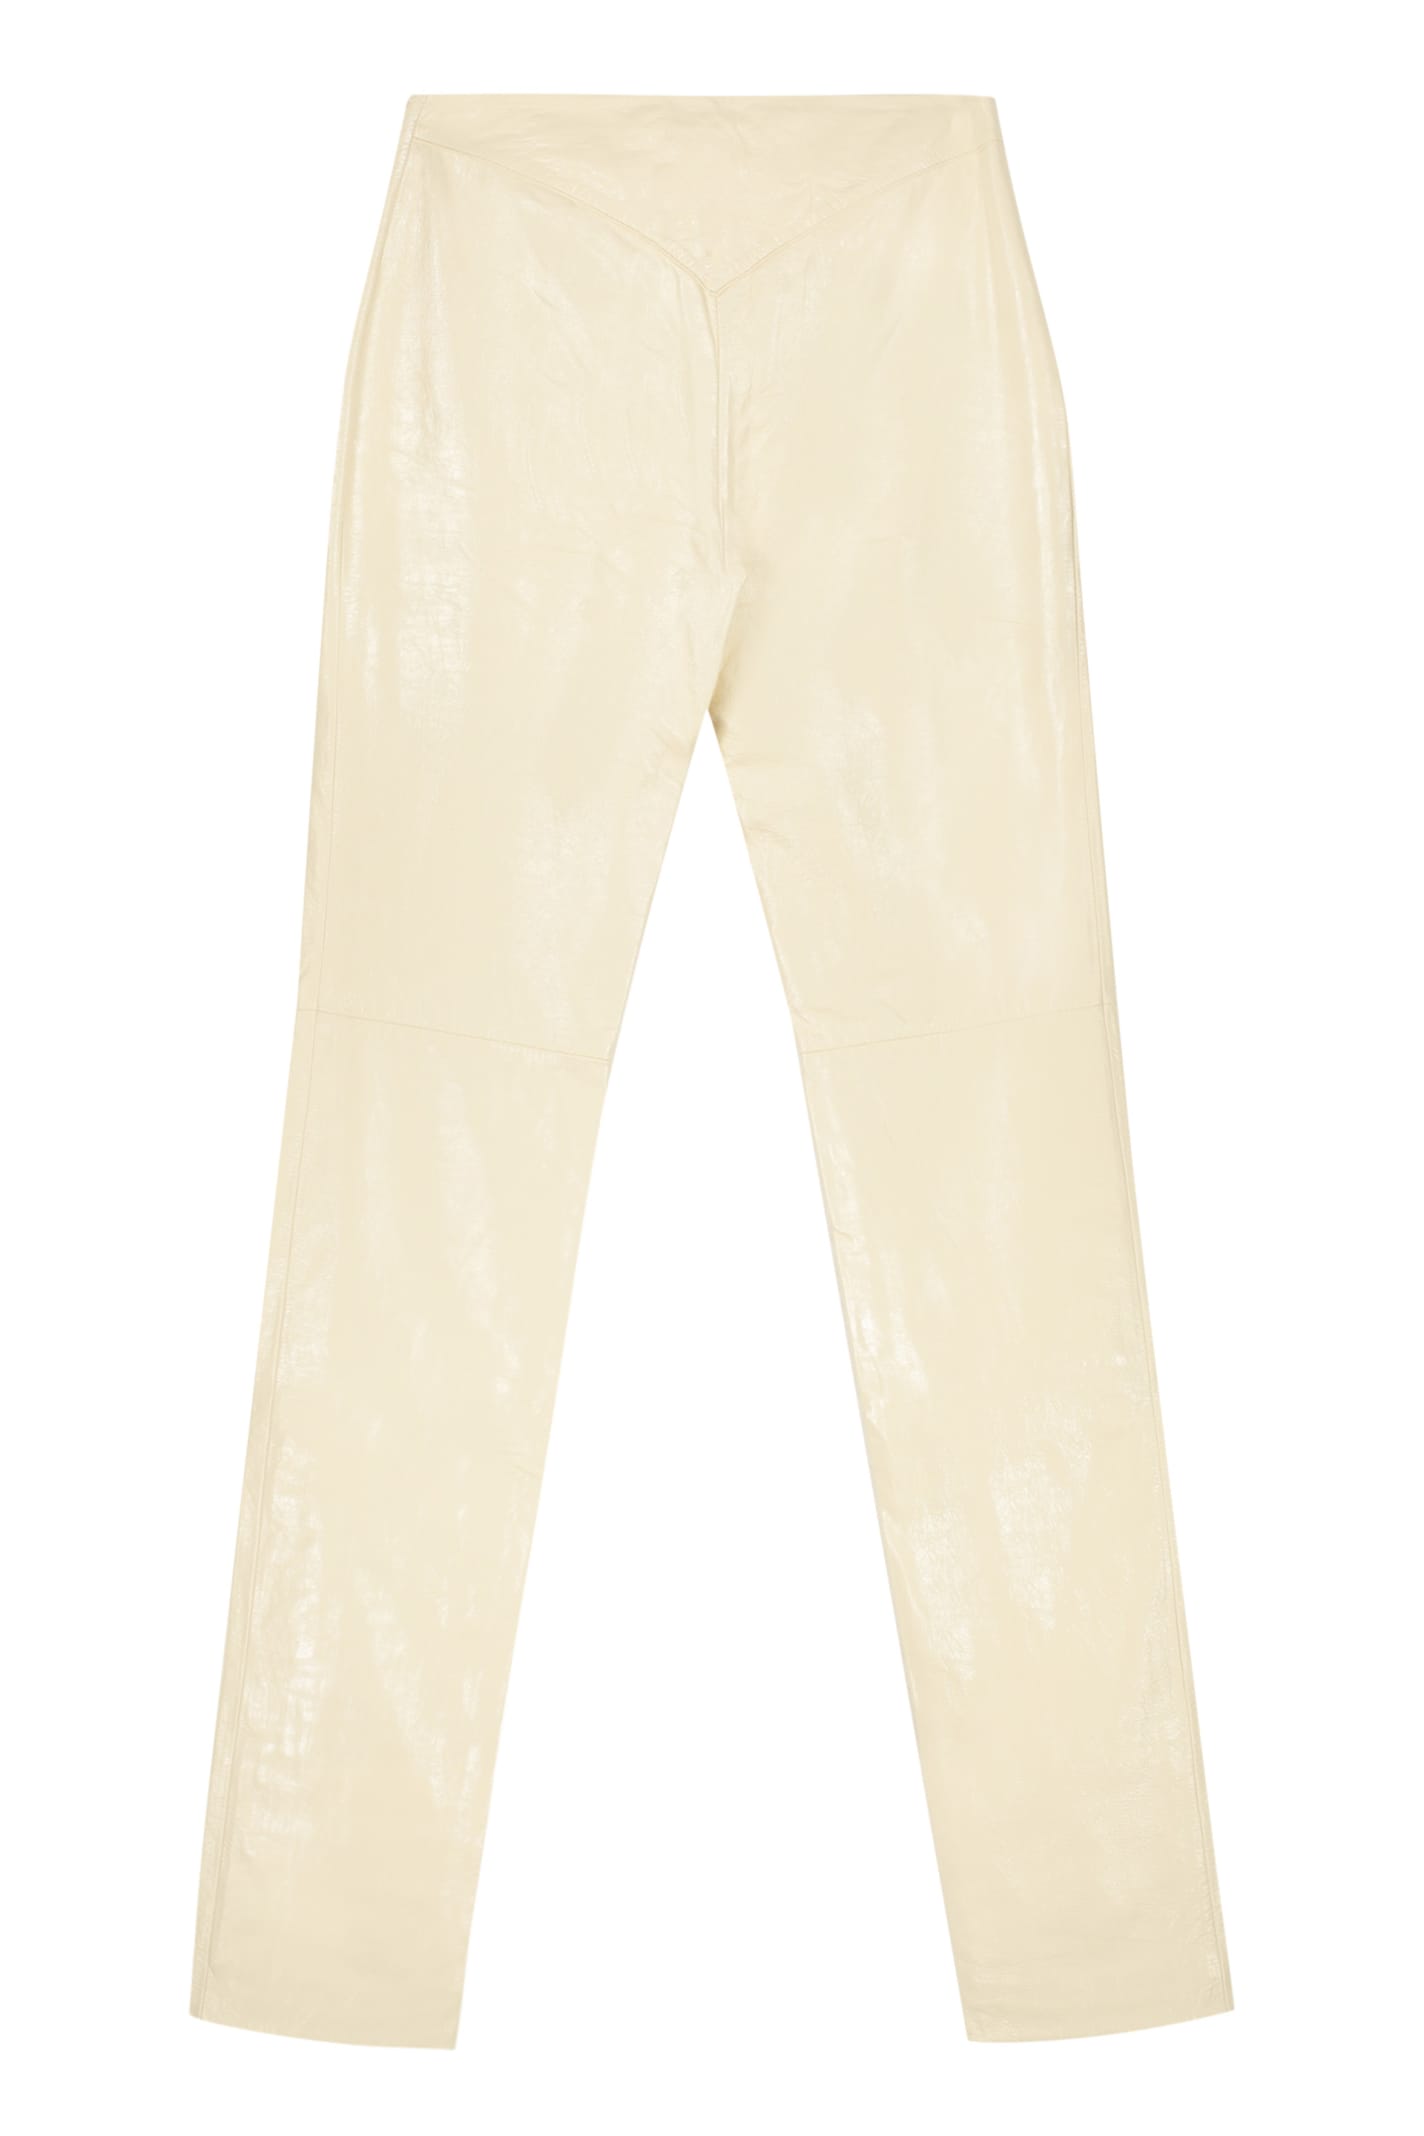 Shop Missoni Leather Pants In Panna